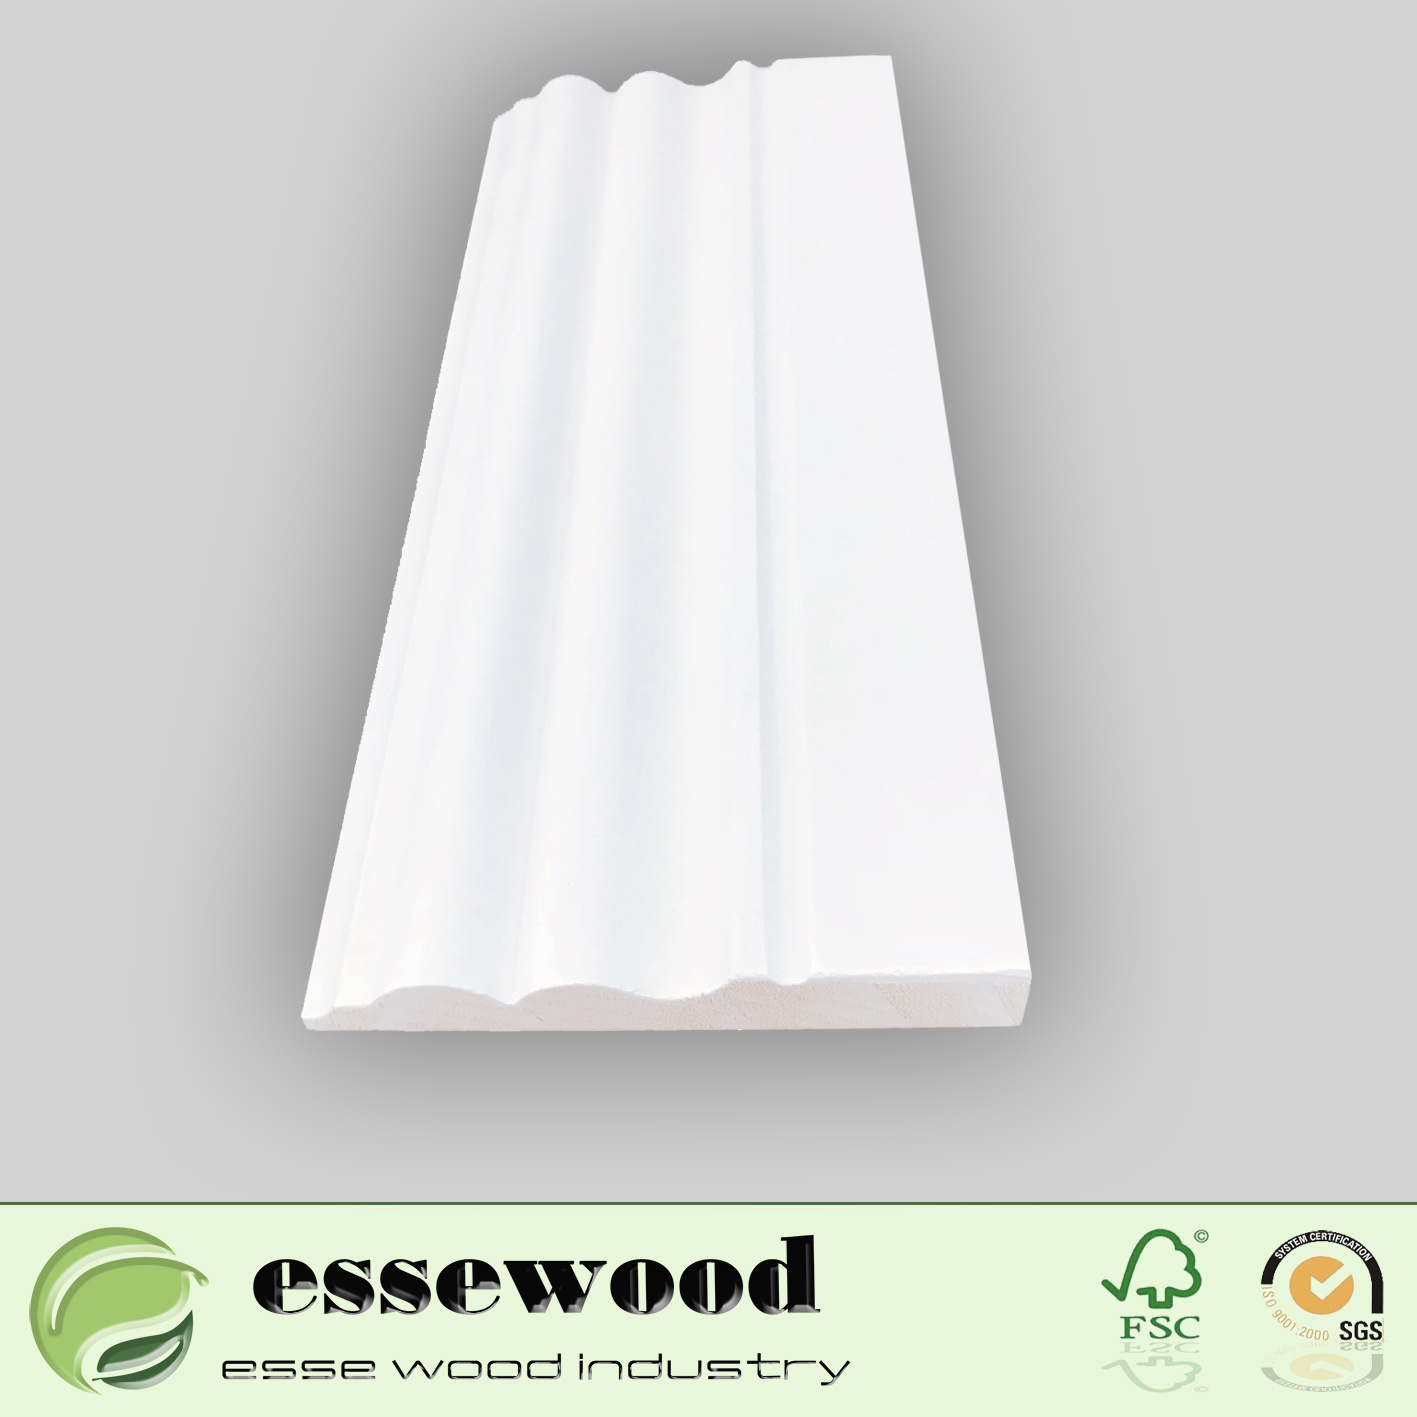 Wholesale Interior Millwork Wood Moulding Flooring Accessories /Baseboard/Skirting Board